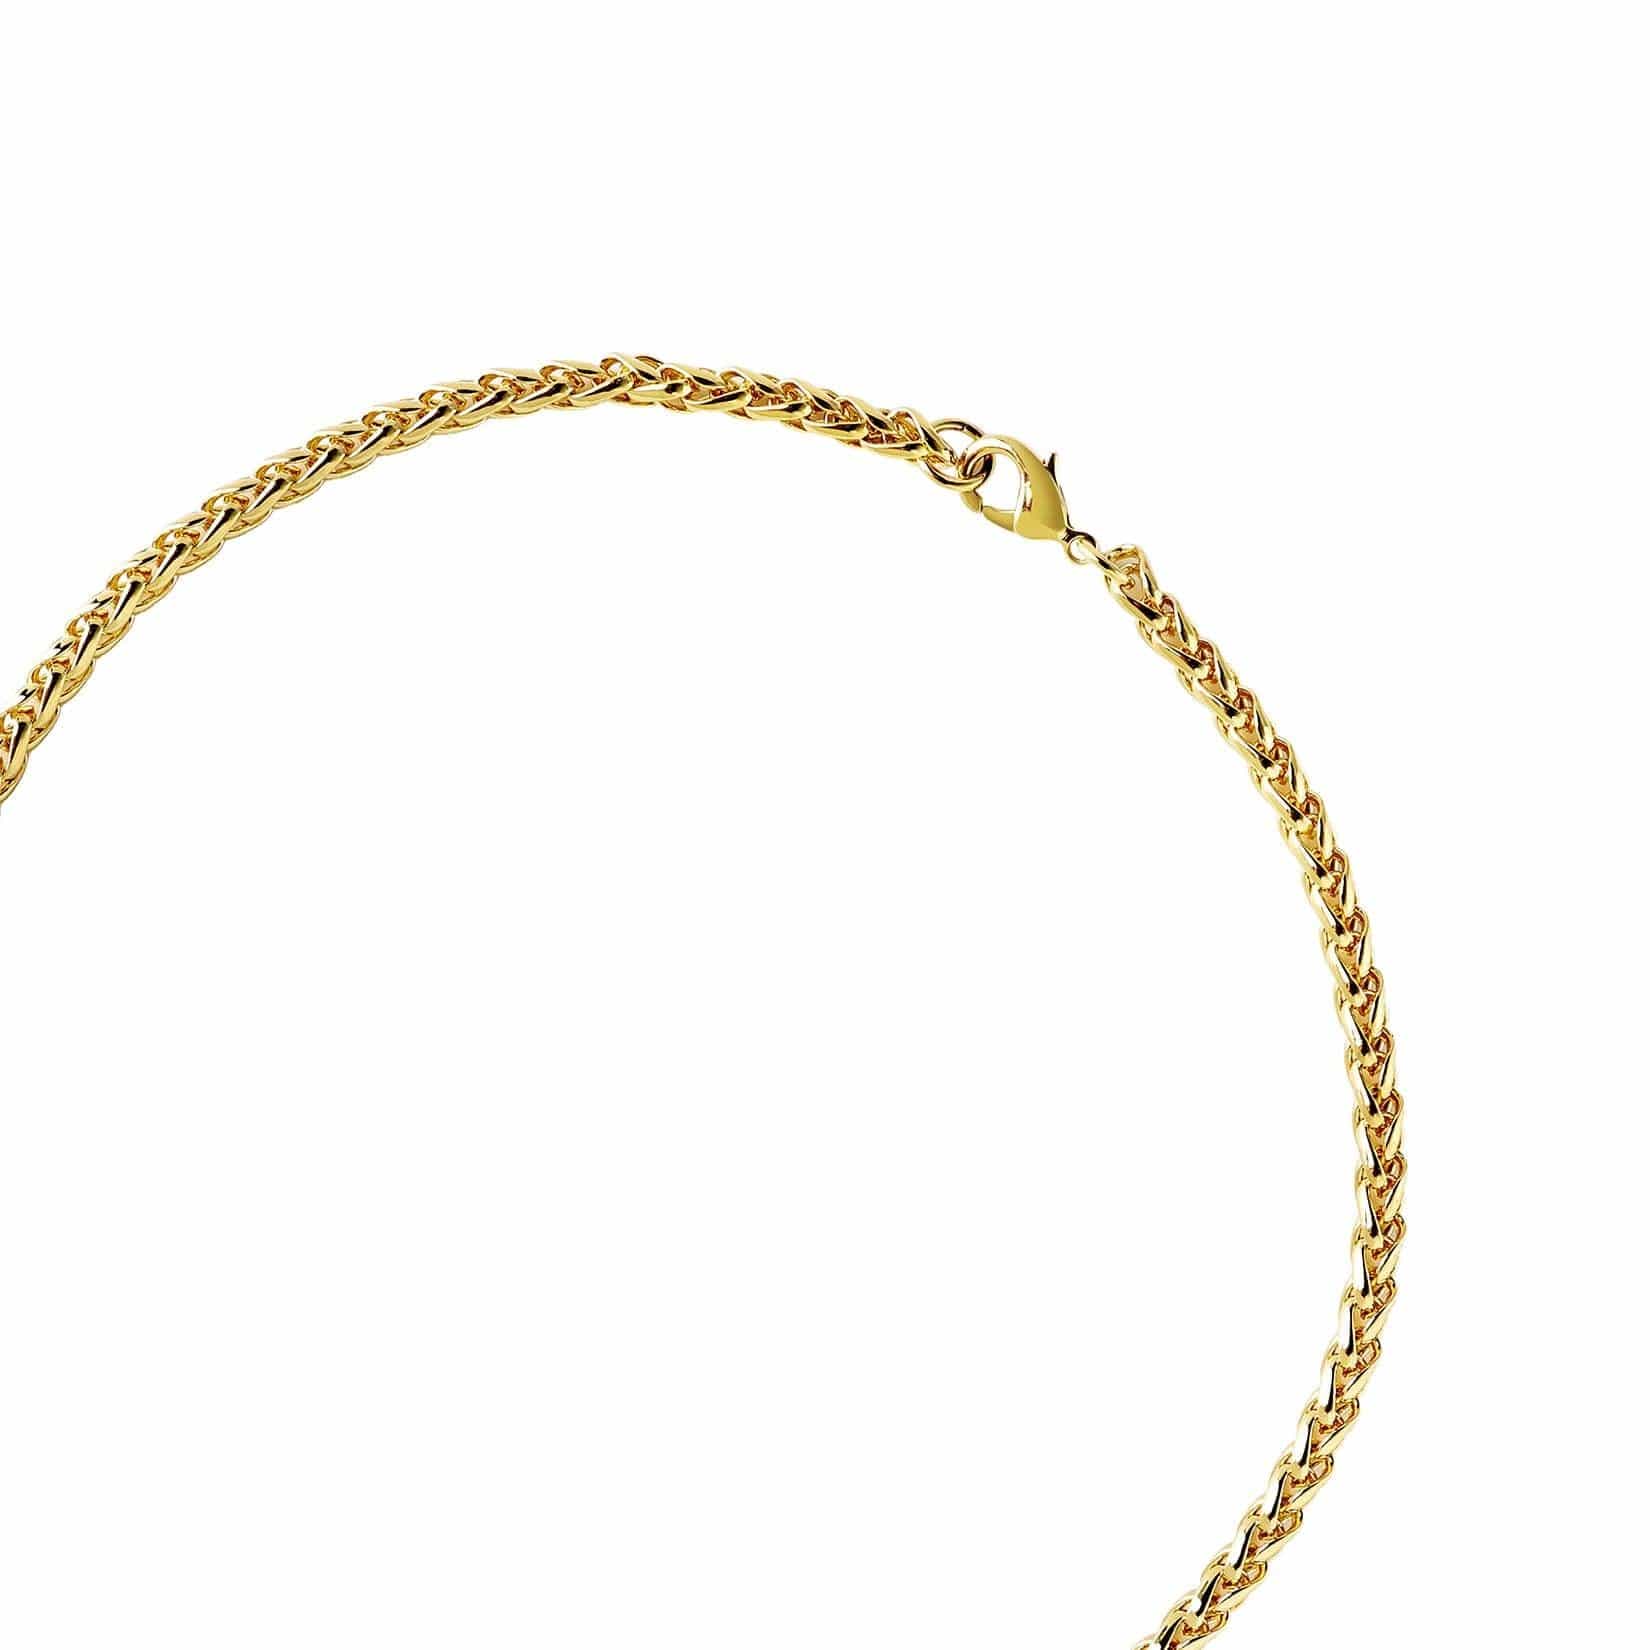 Gold Plated Chunky Chain Necklace - Juulry.com